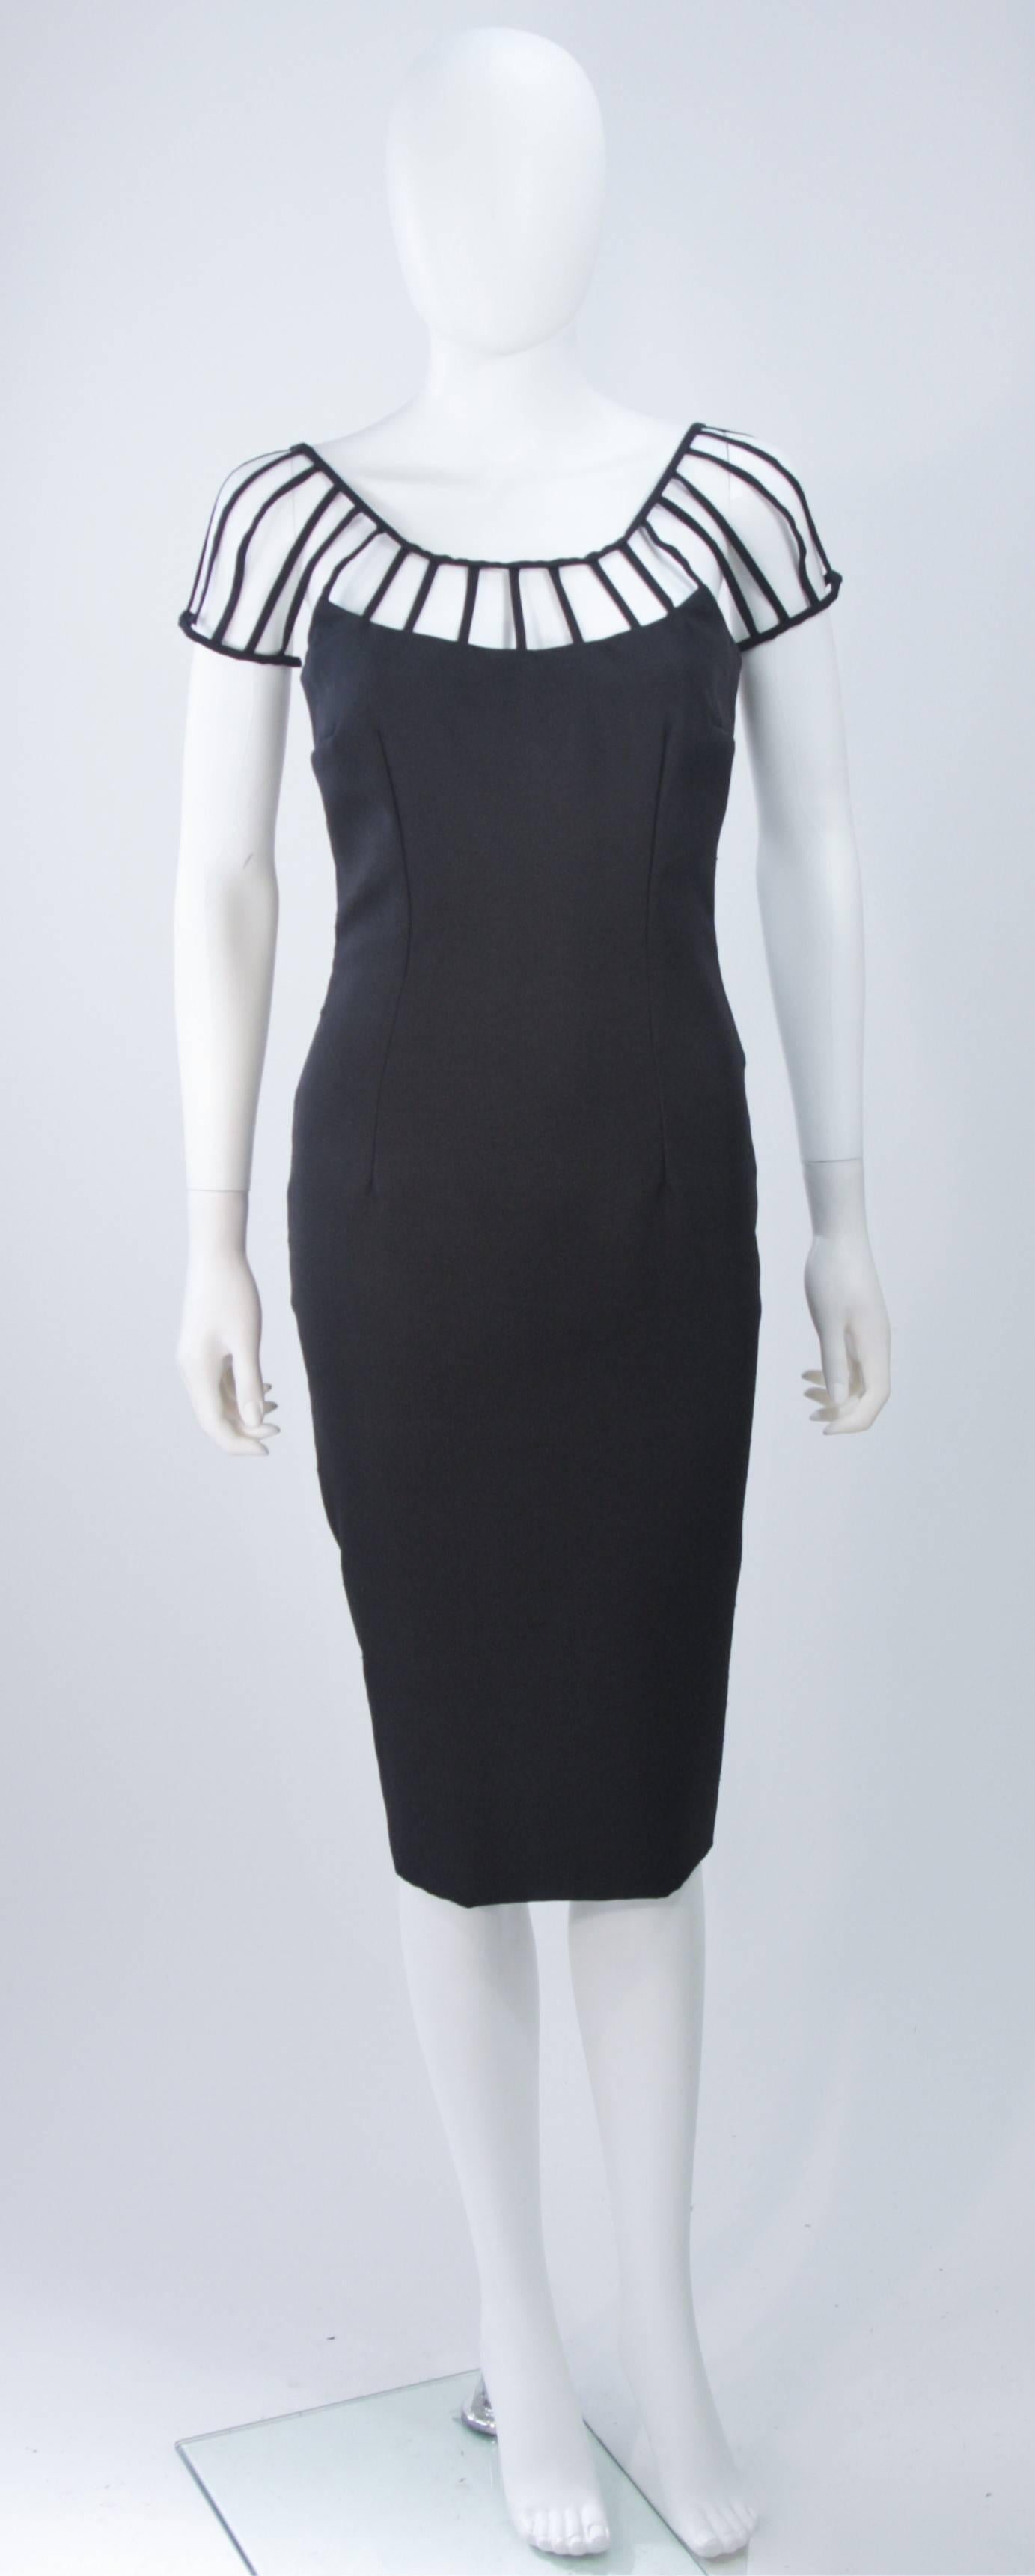 This ELIZABETH MASON COUTURE exquisite cocktail dress is fashioned from the finest black Silk Dupioni and features a gorgeous body skimming silhouette and an eye catching floating cage detail. 

This is a couture custom order and can made a variety